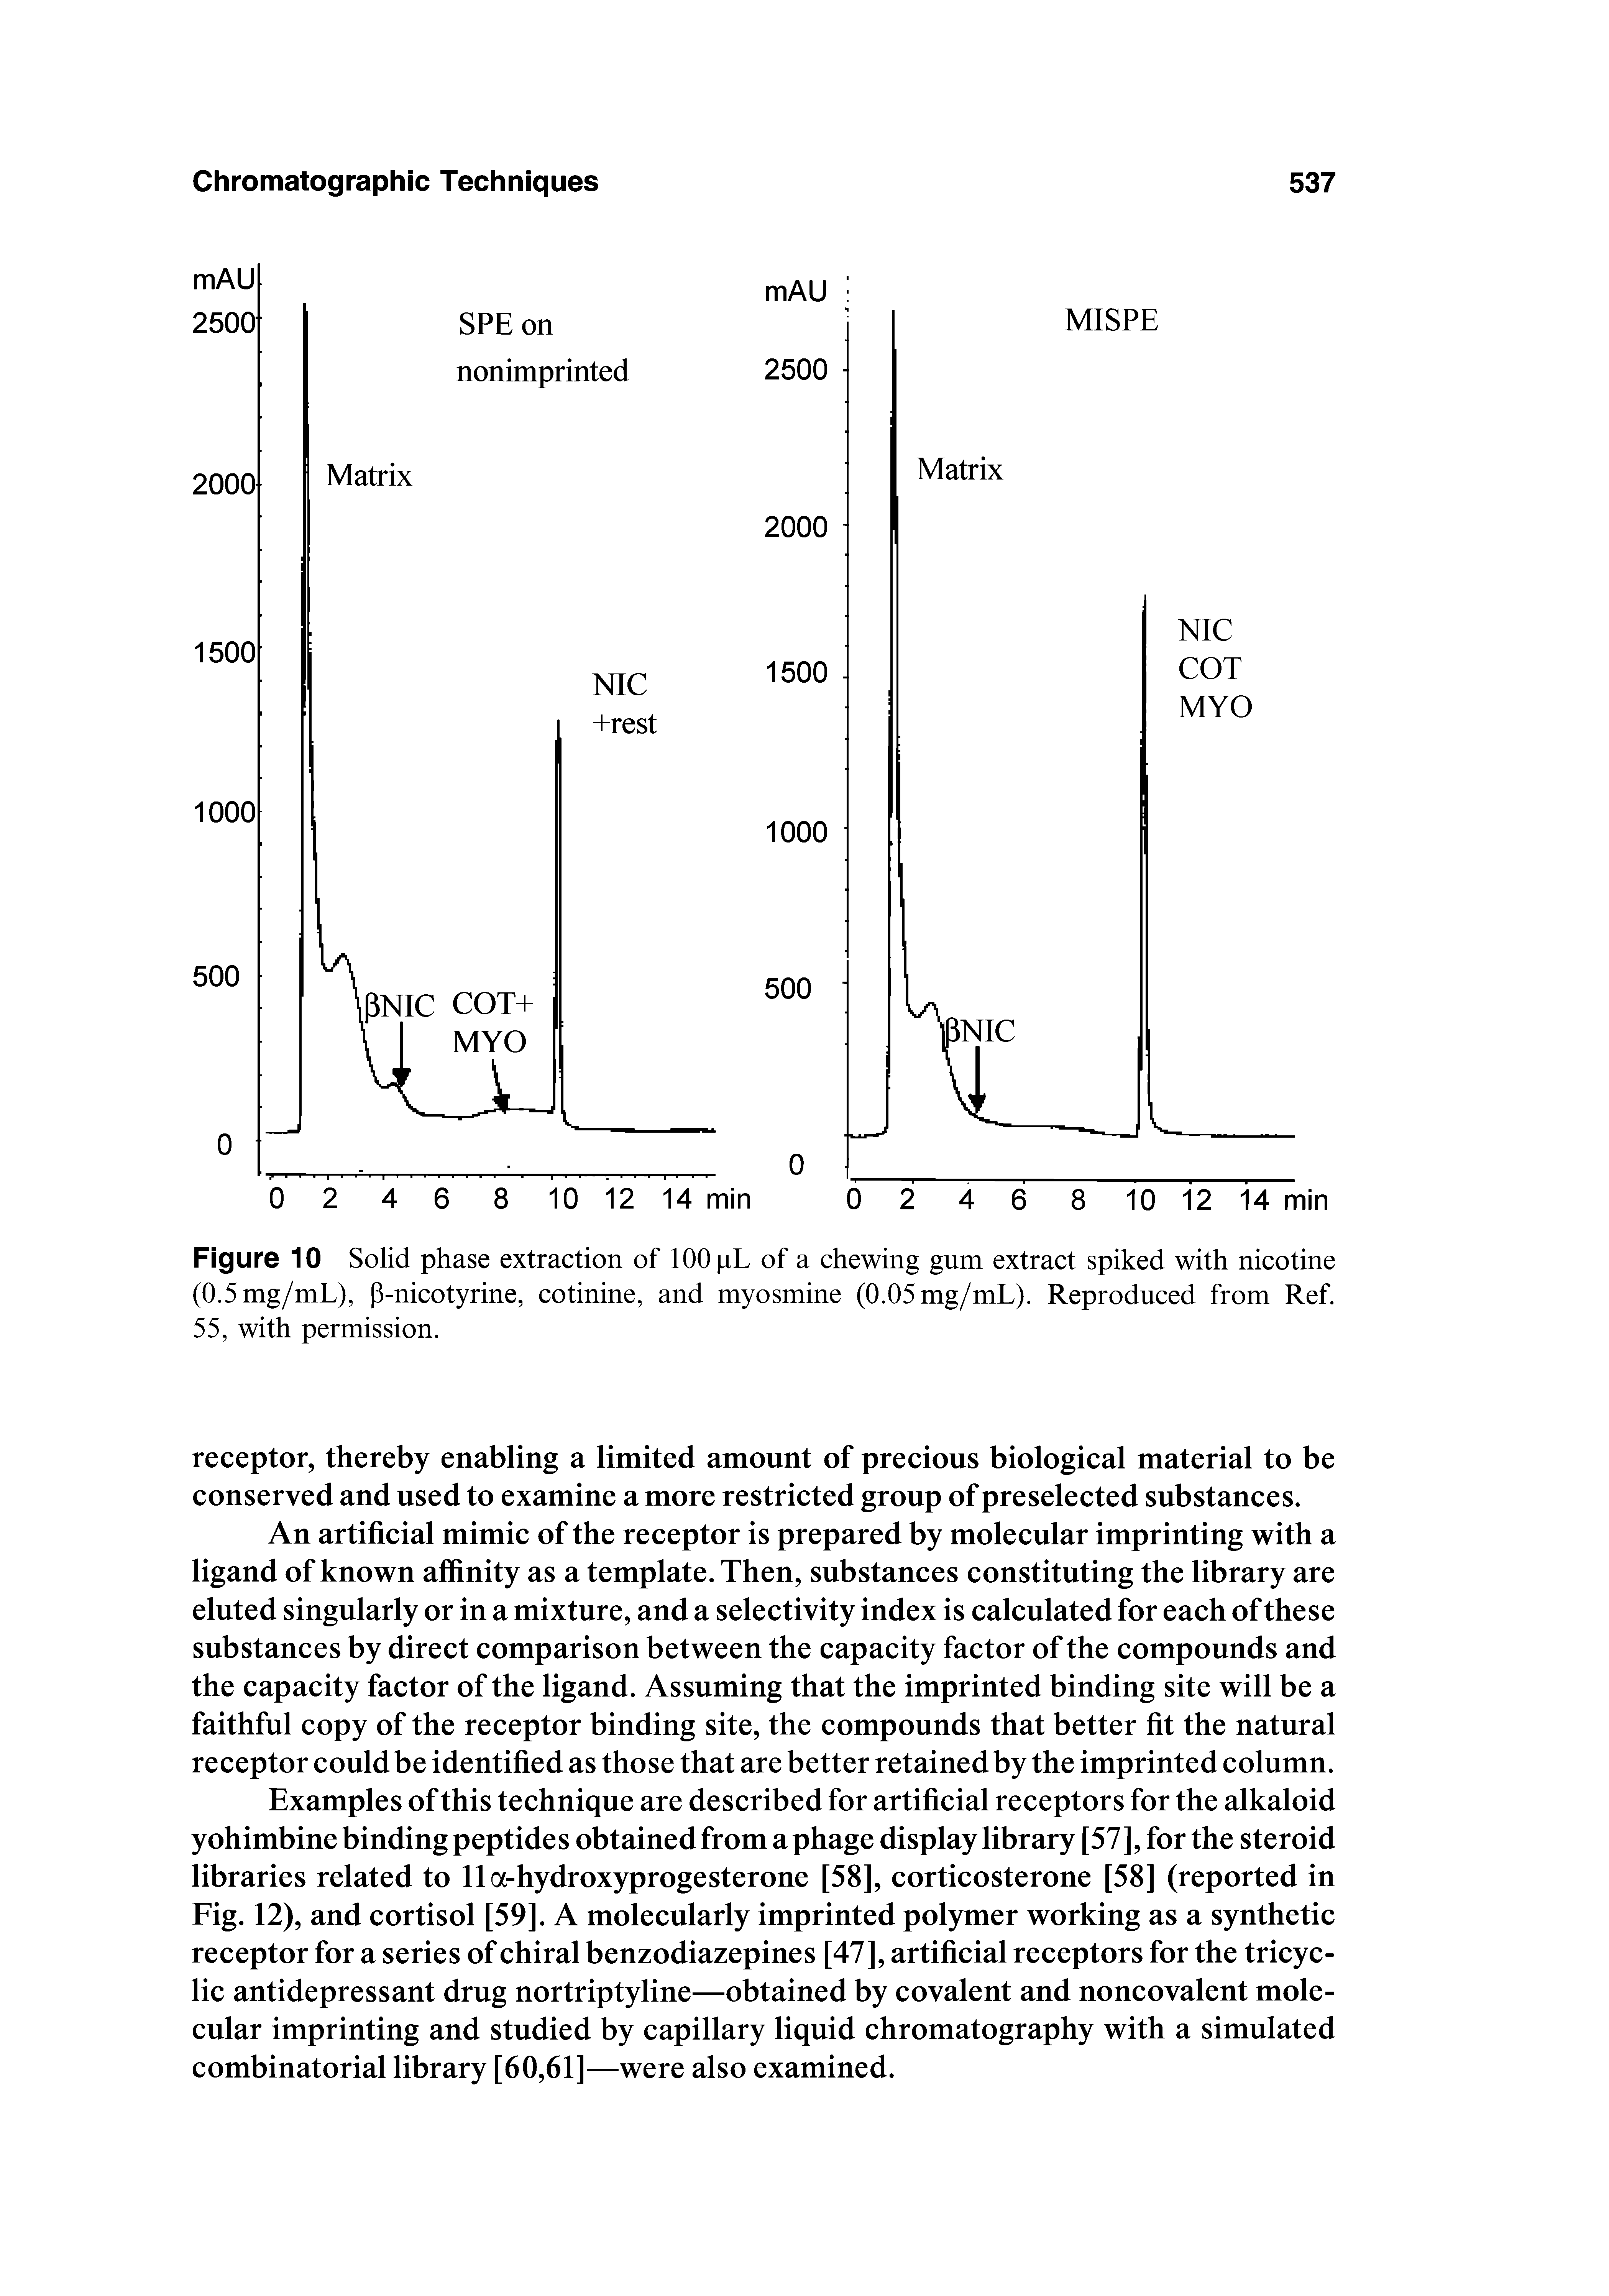 Figure 10 Solid phase extraction of 100 pL of a chewing gum extract spiked with nicotine (0.5mg/mL), P-nicotyrine, cotinine, and myosmine (0.05mg/mL). Reproduced from Ref. 55, with permission.